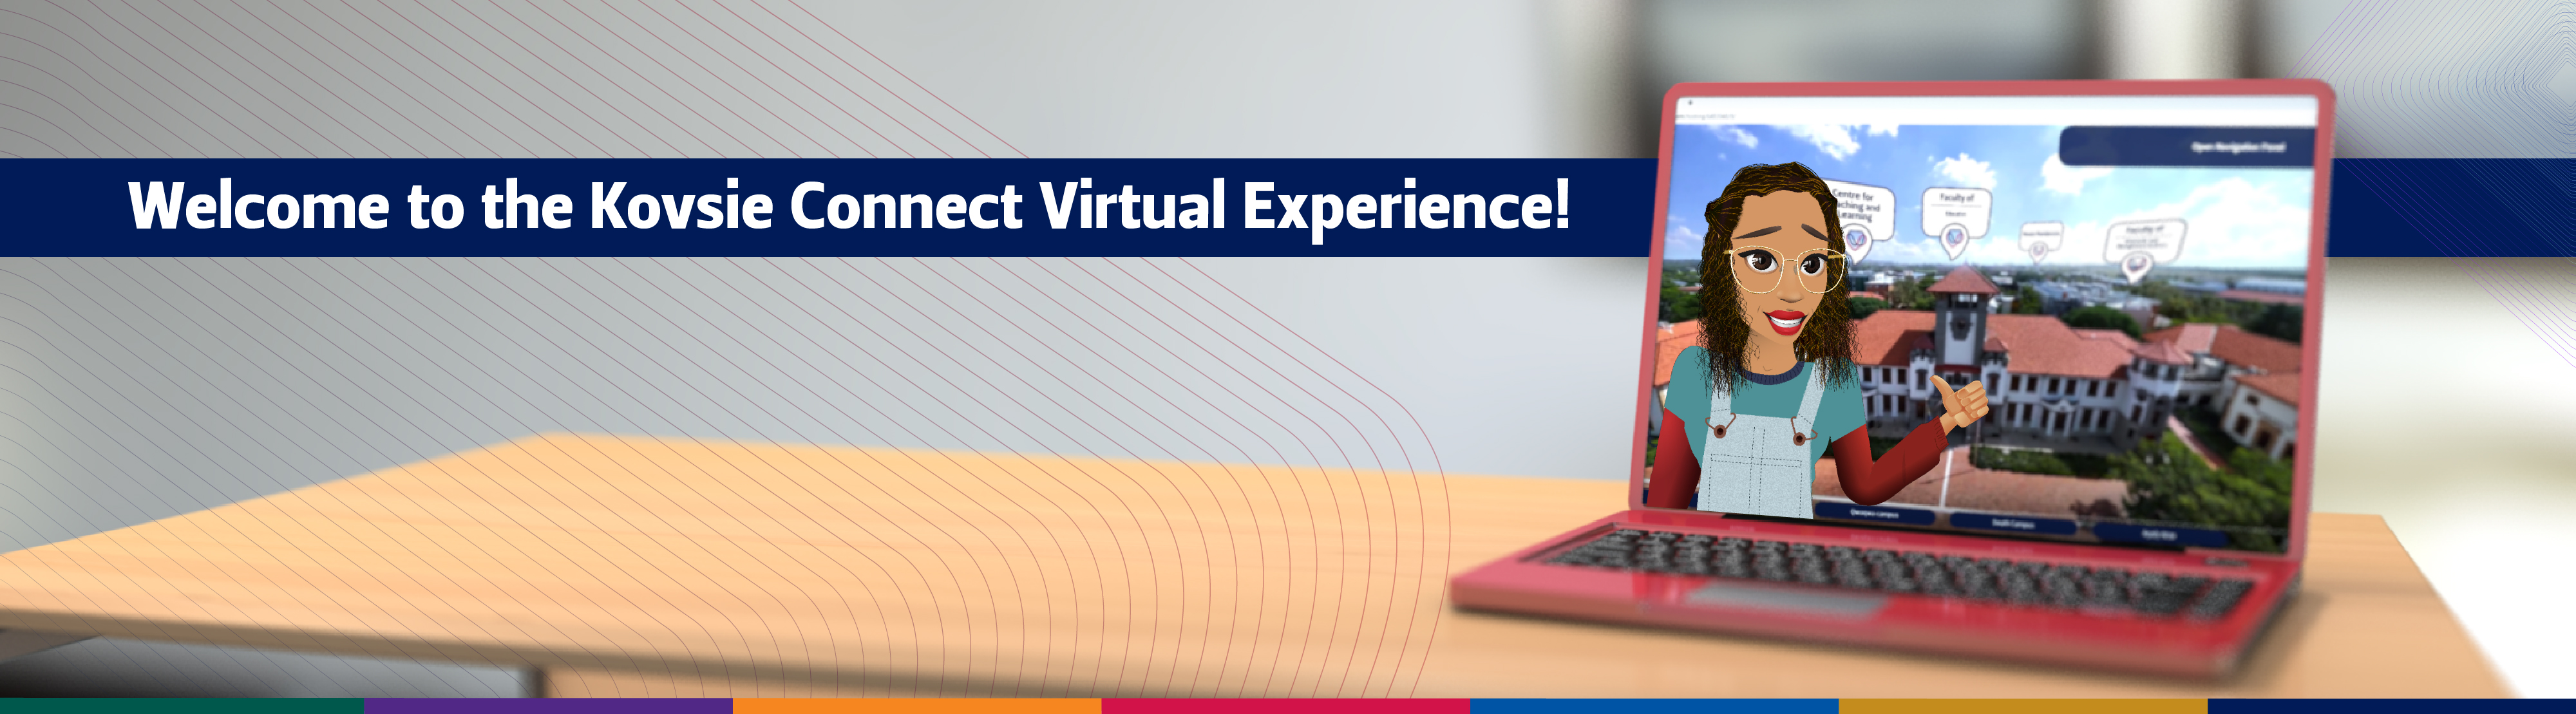 Welcome to the Kovsie Connect Virtual Experience